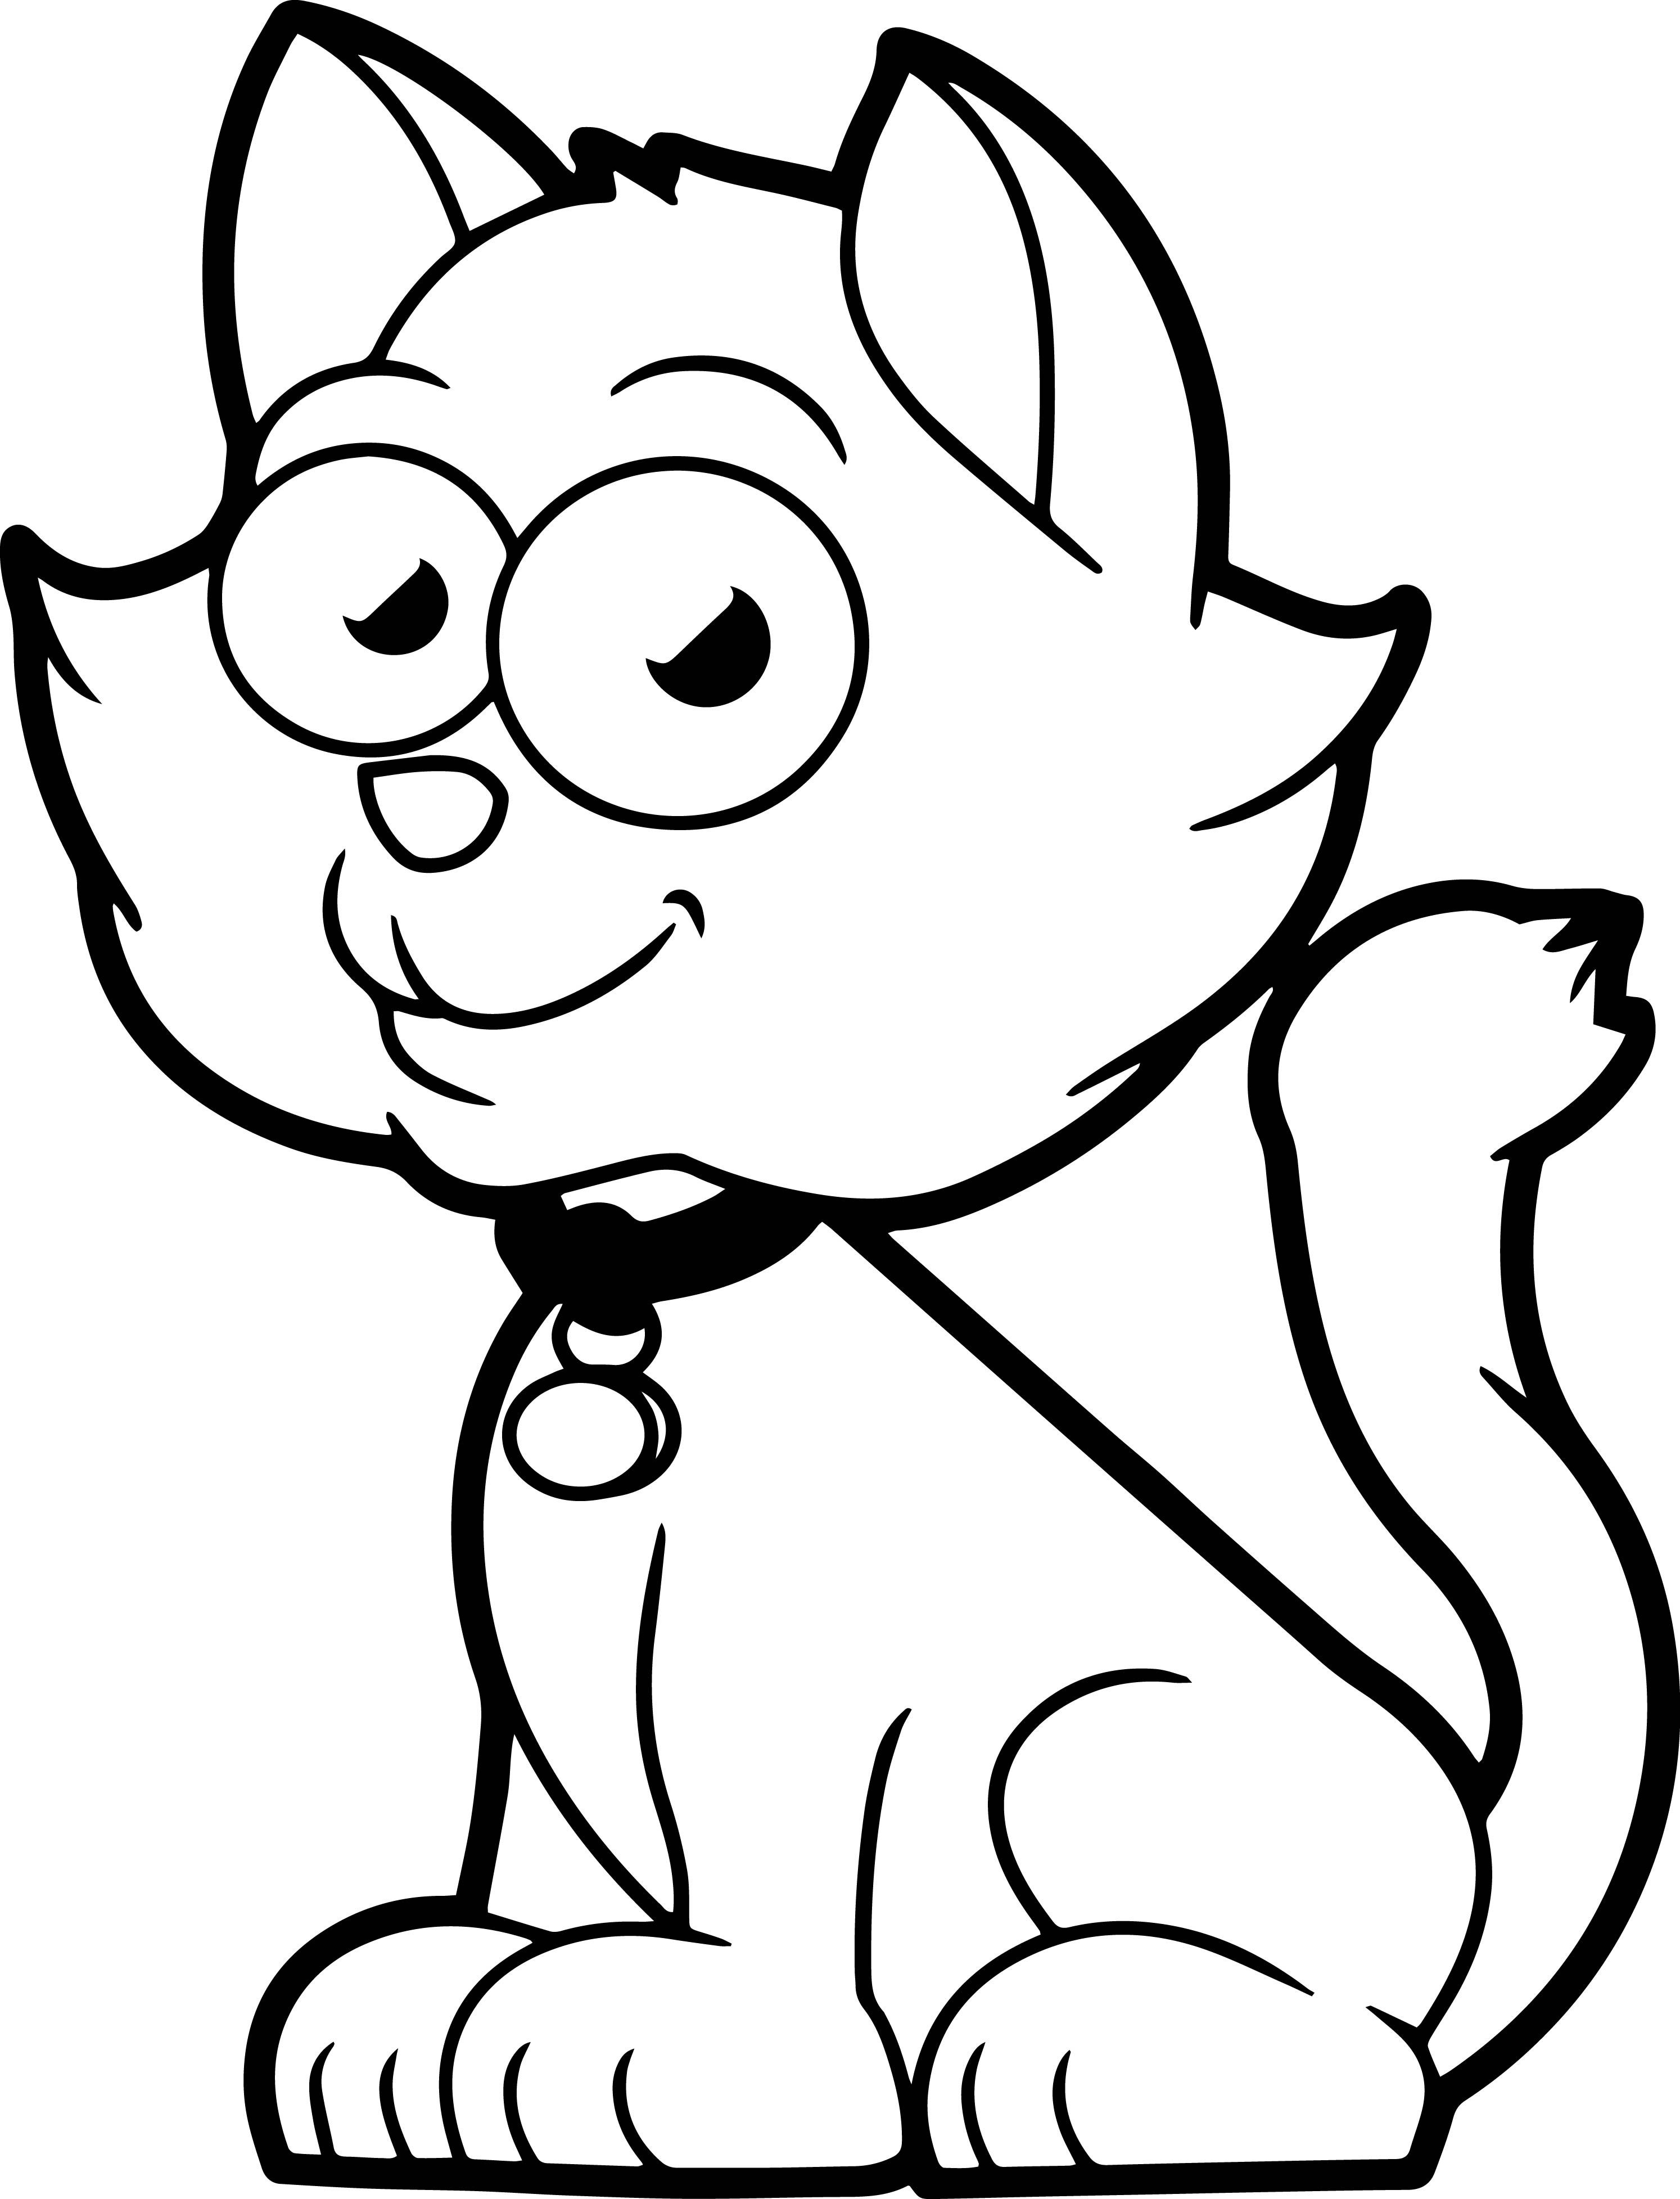 white-cat-also-pine-cone-outline-on-coloring-pages-sketch-coloring-page